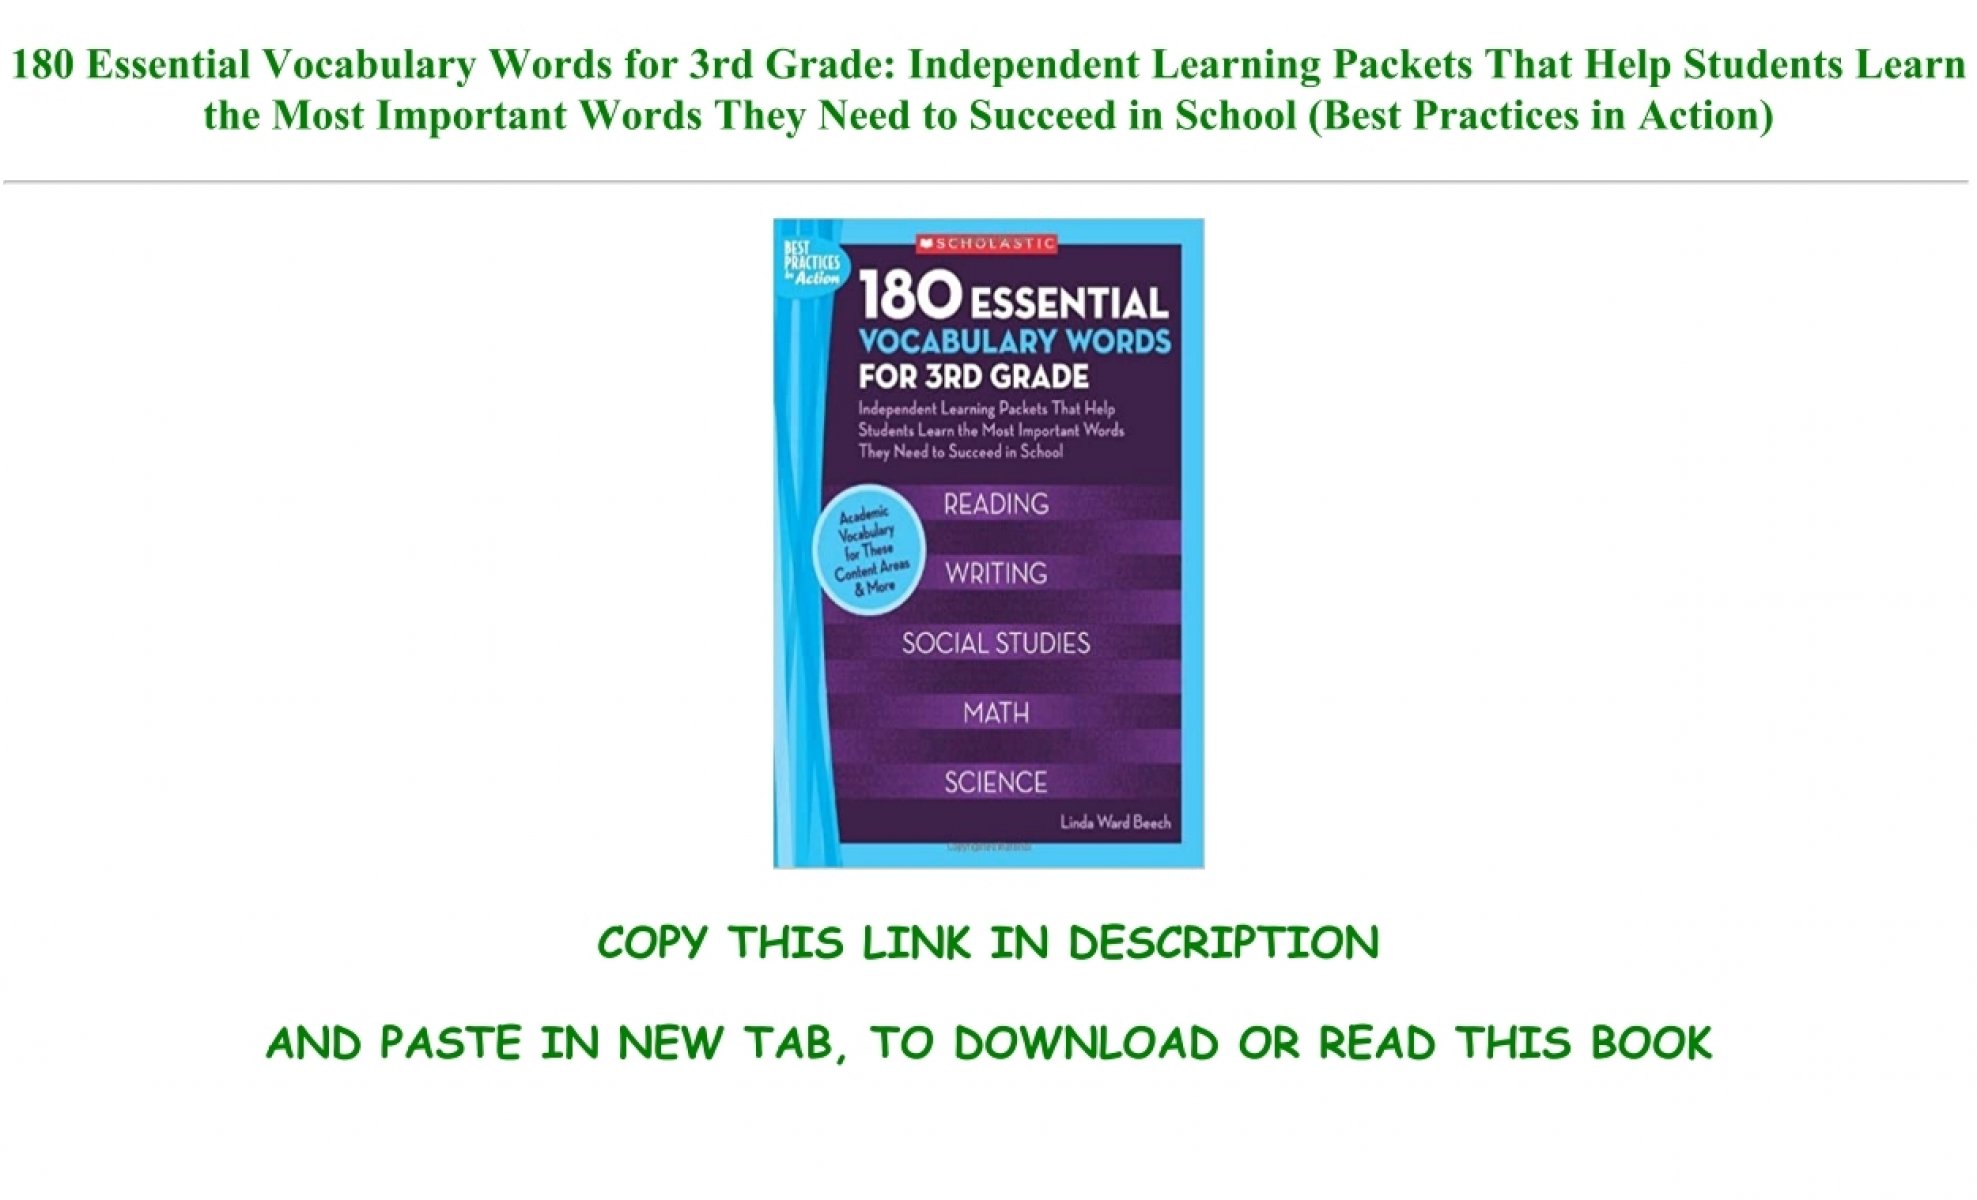 download-pdf-180-essential-vocabulary-words-for-3rd-grade-independent-learning-packets-that